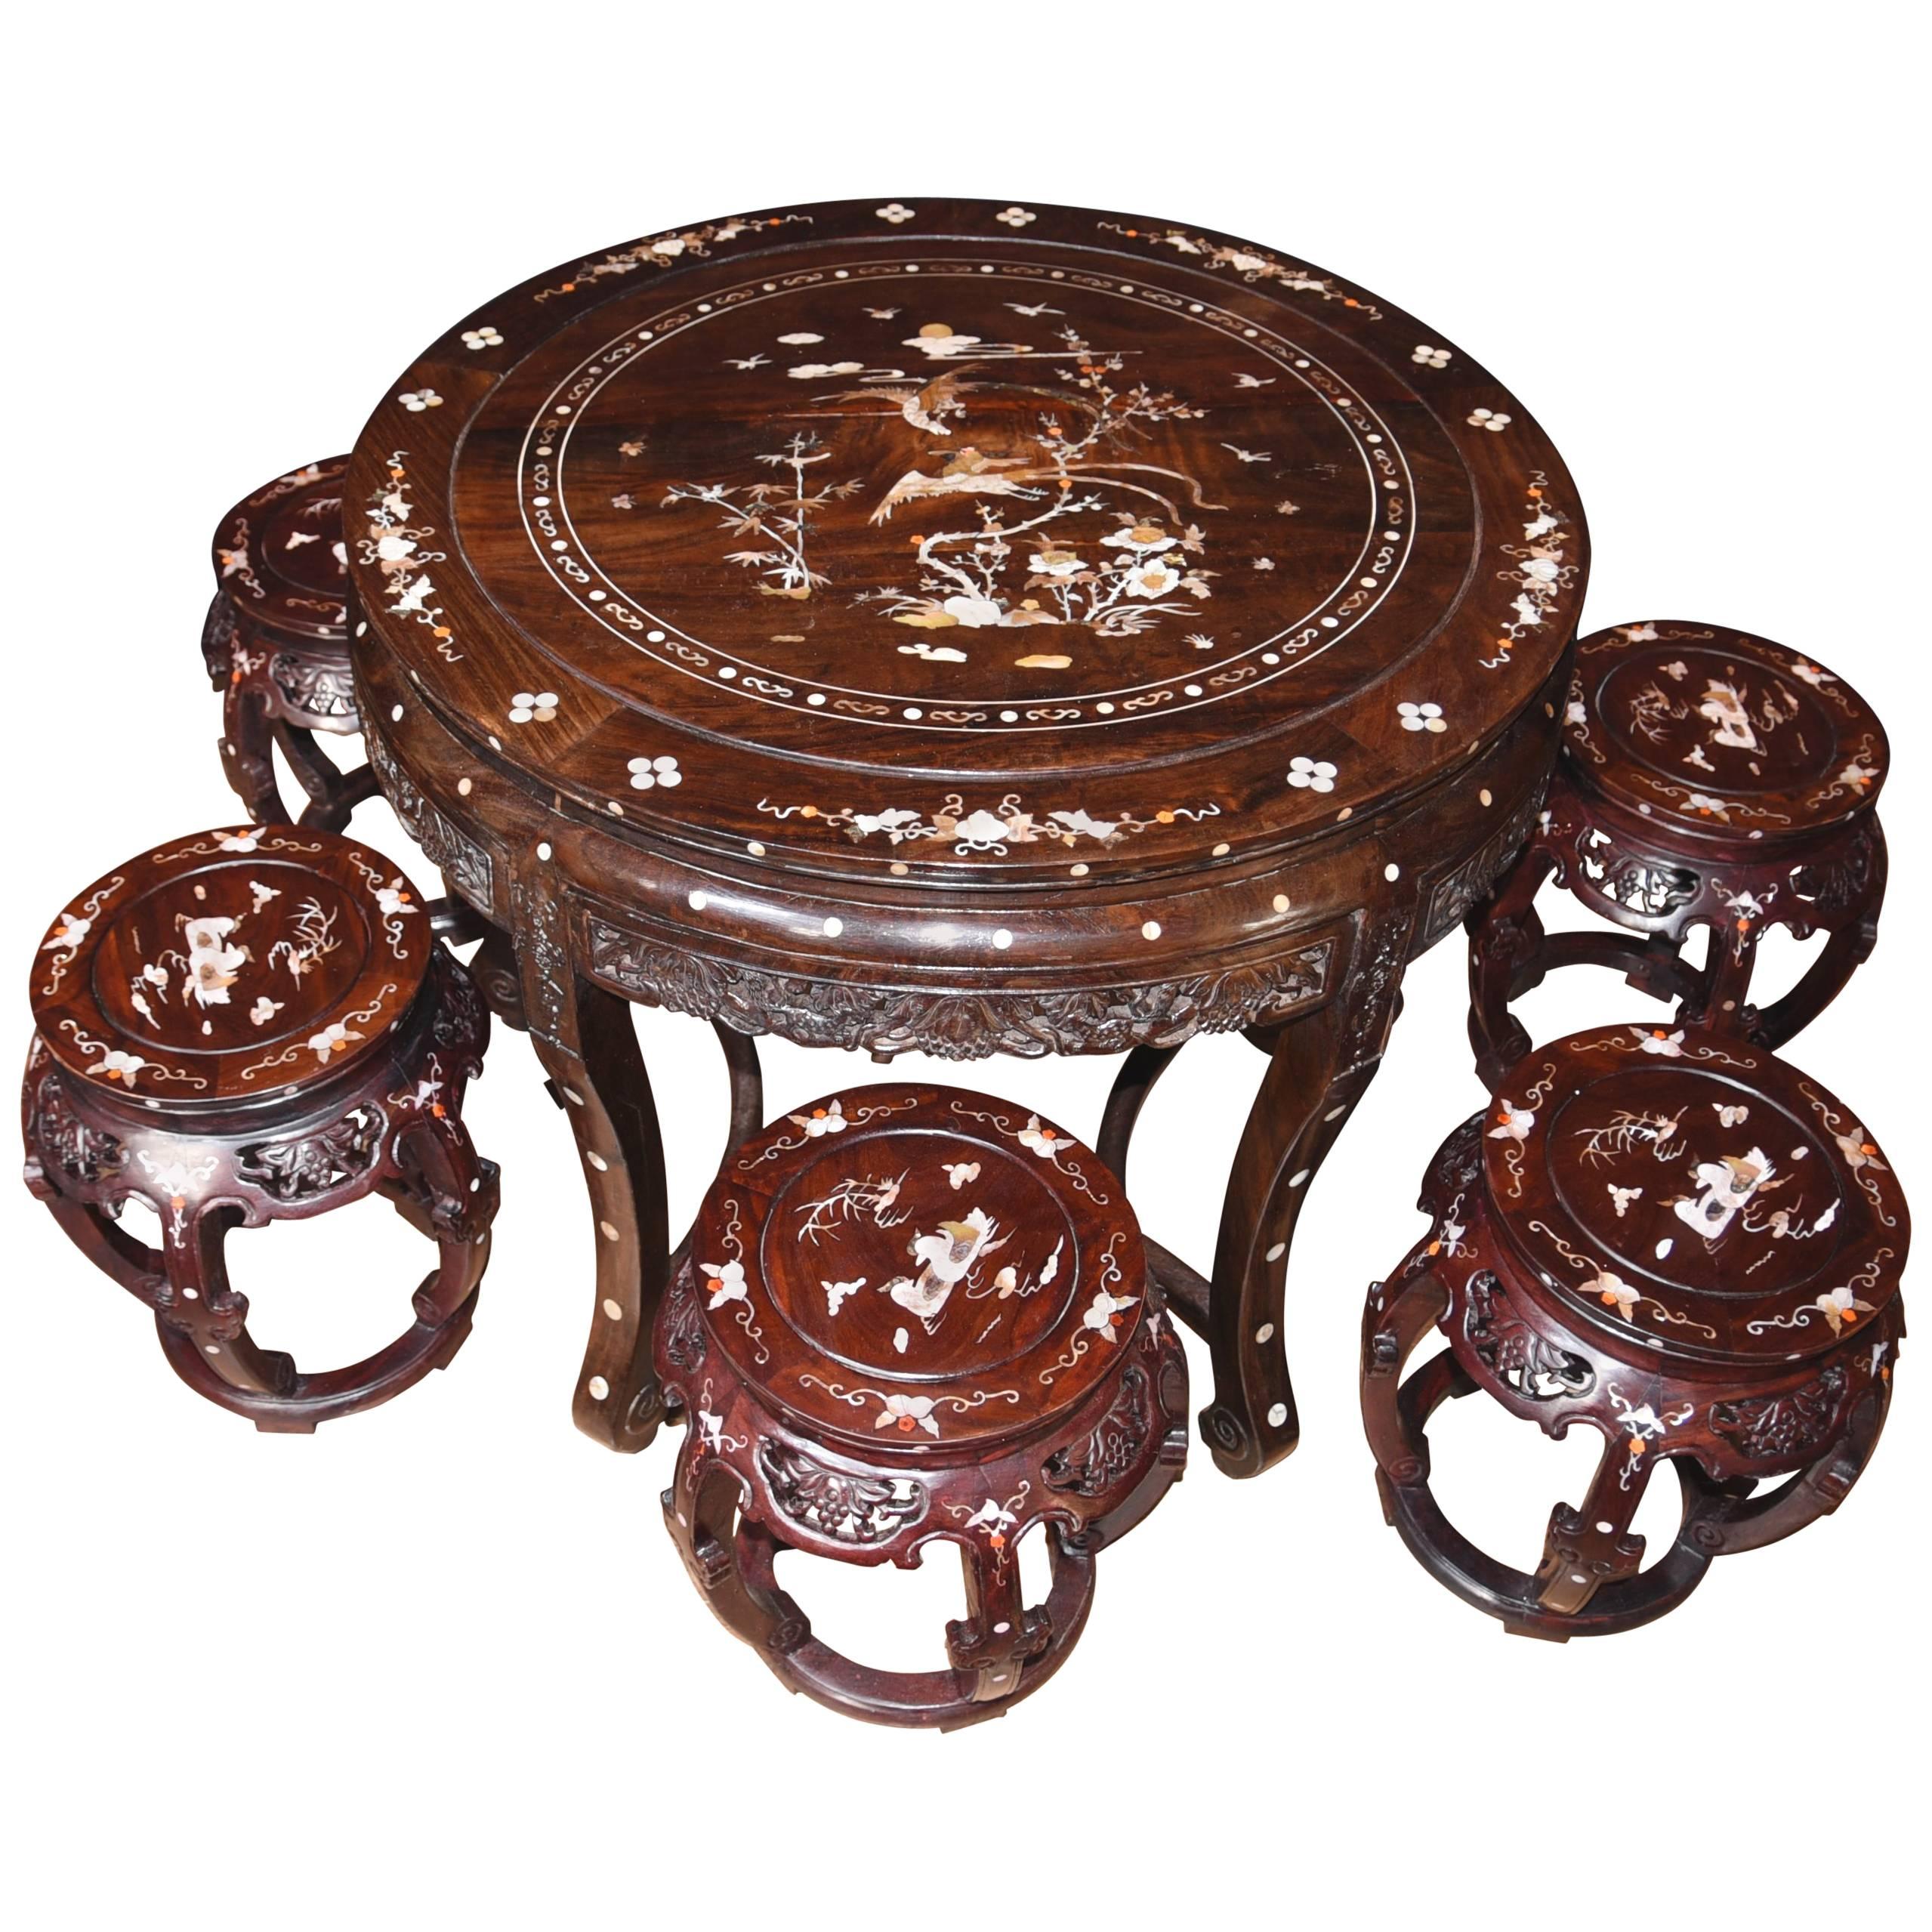 Antique Chinese Hardwood Table Stool Dining Set Mother-of-Pearl Inlay, 1920 For Sale